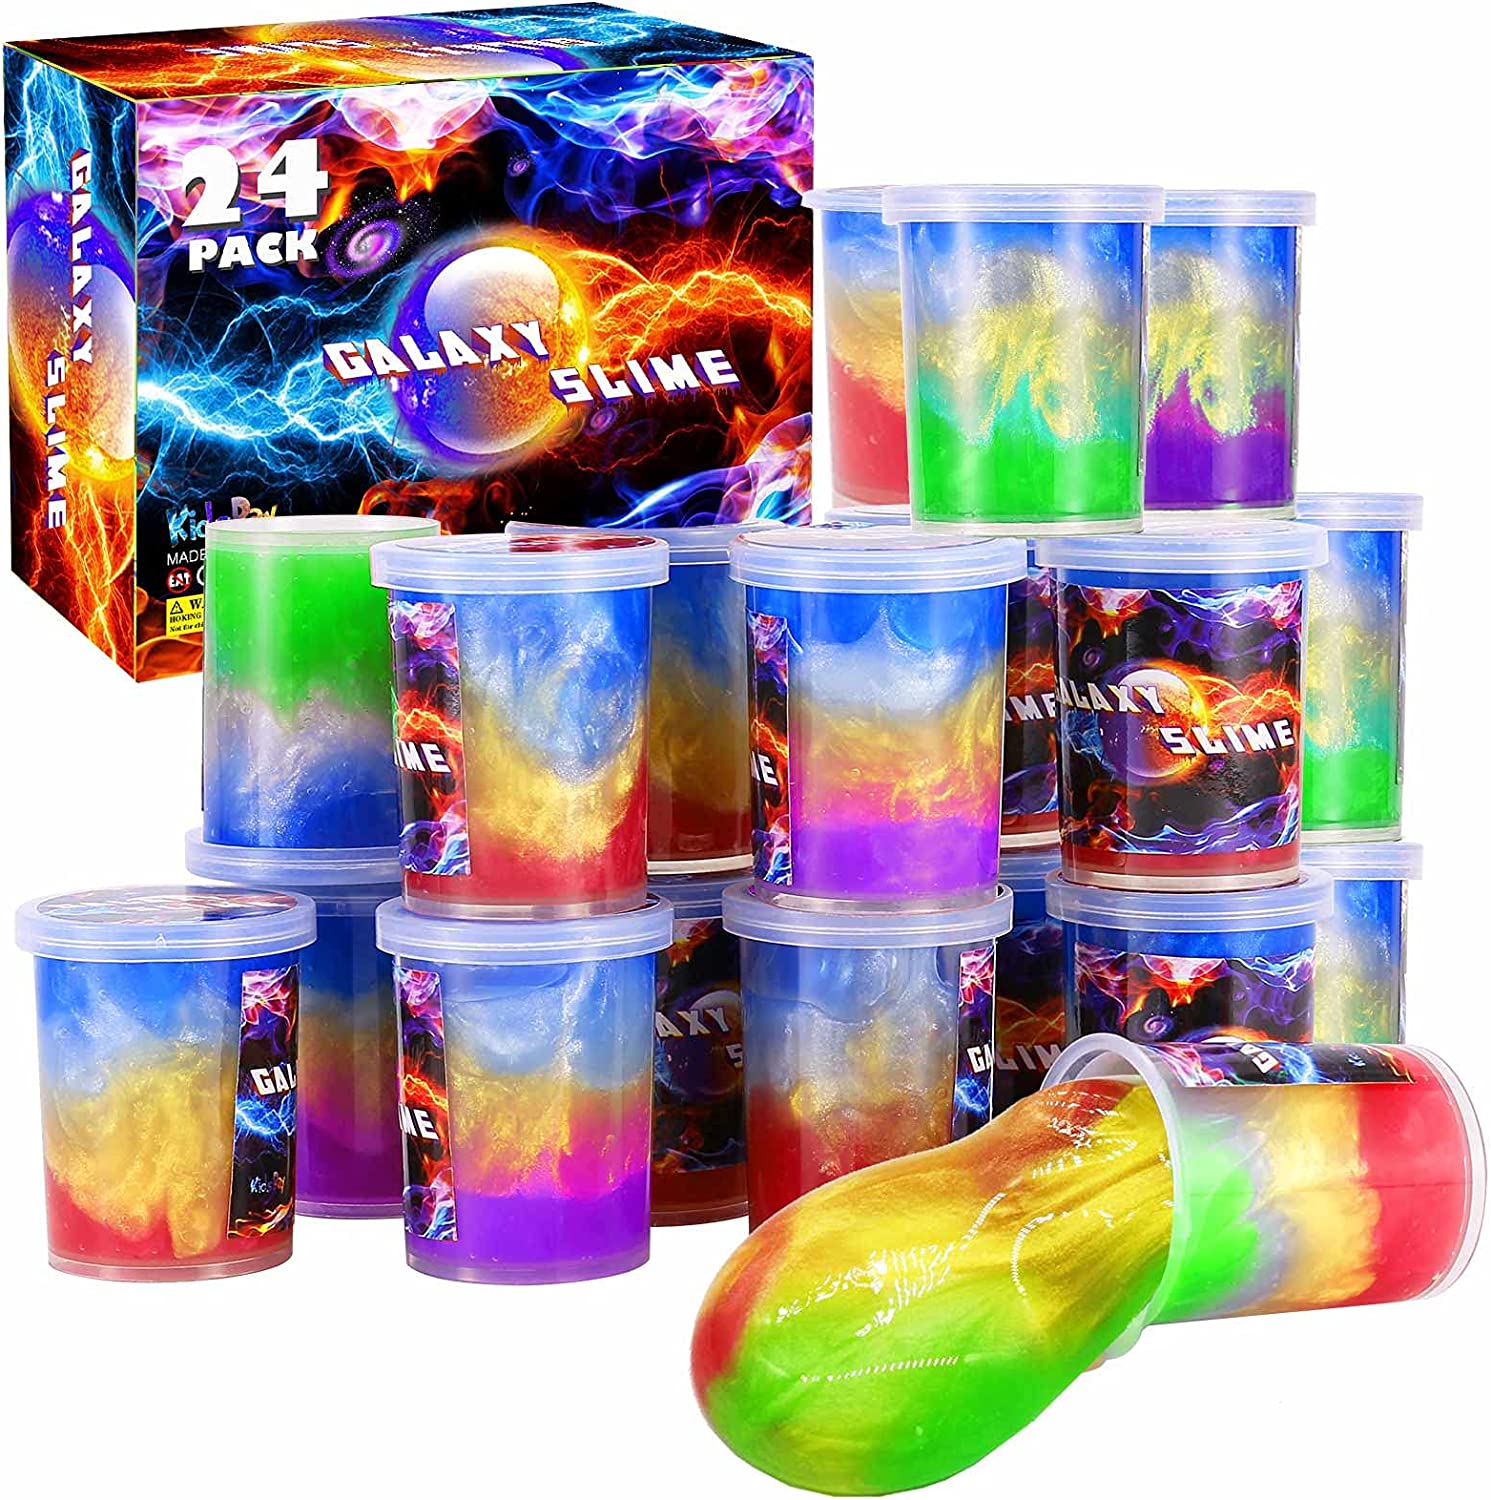 Original Stationery Galaxy Space Goo, Glow in The Dark DIY Space Putty, 29  Piece Therapy Putty with Glow in The Dark Goo Kit, Kids Stress Relief Putty  : Health & Household 